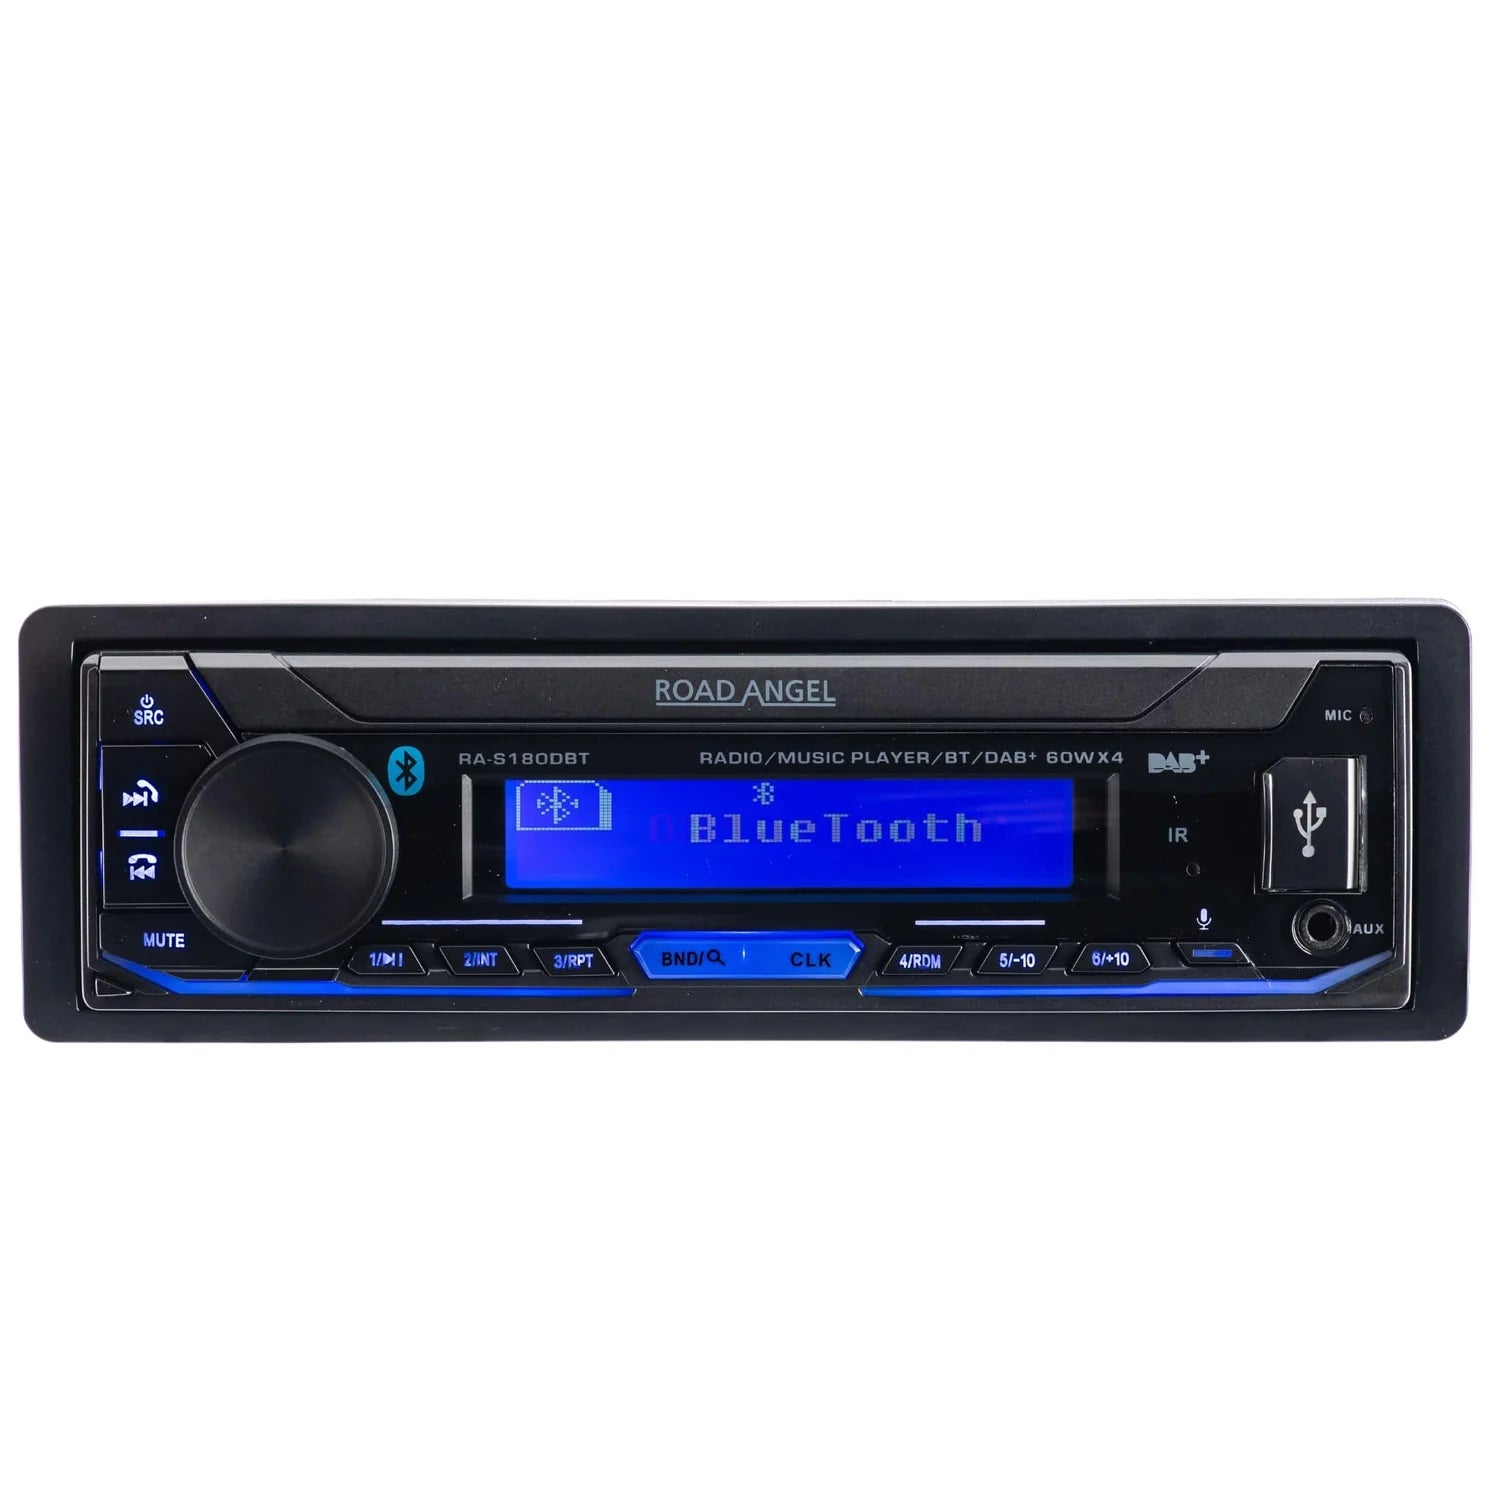 Road Angel RA-S180DBT Mechless Digital Media Player with Bluetooth and DAB